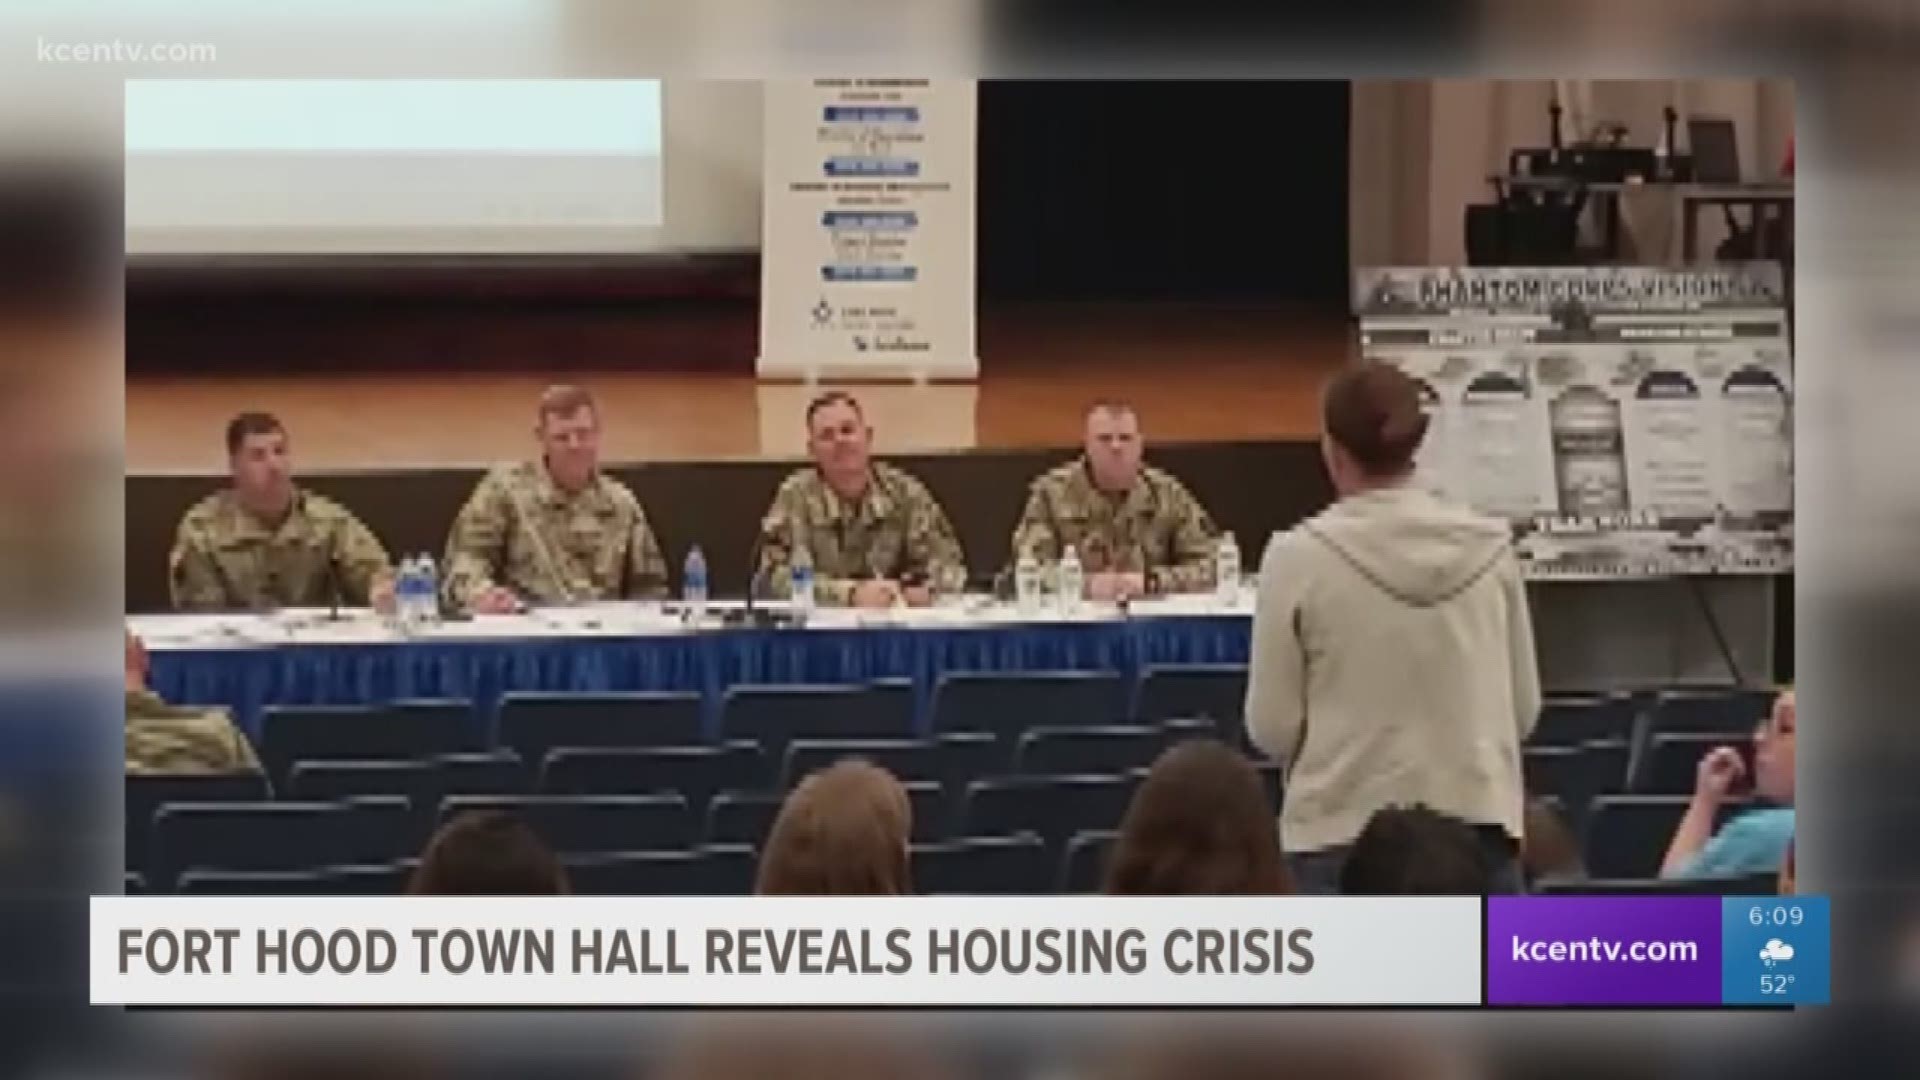 Military Matters reporter Bary Roy breaks down how Fort Hood plans to tackle its housing issues.